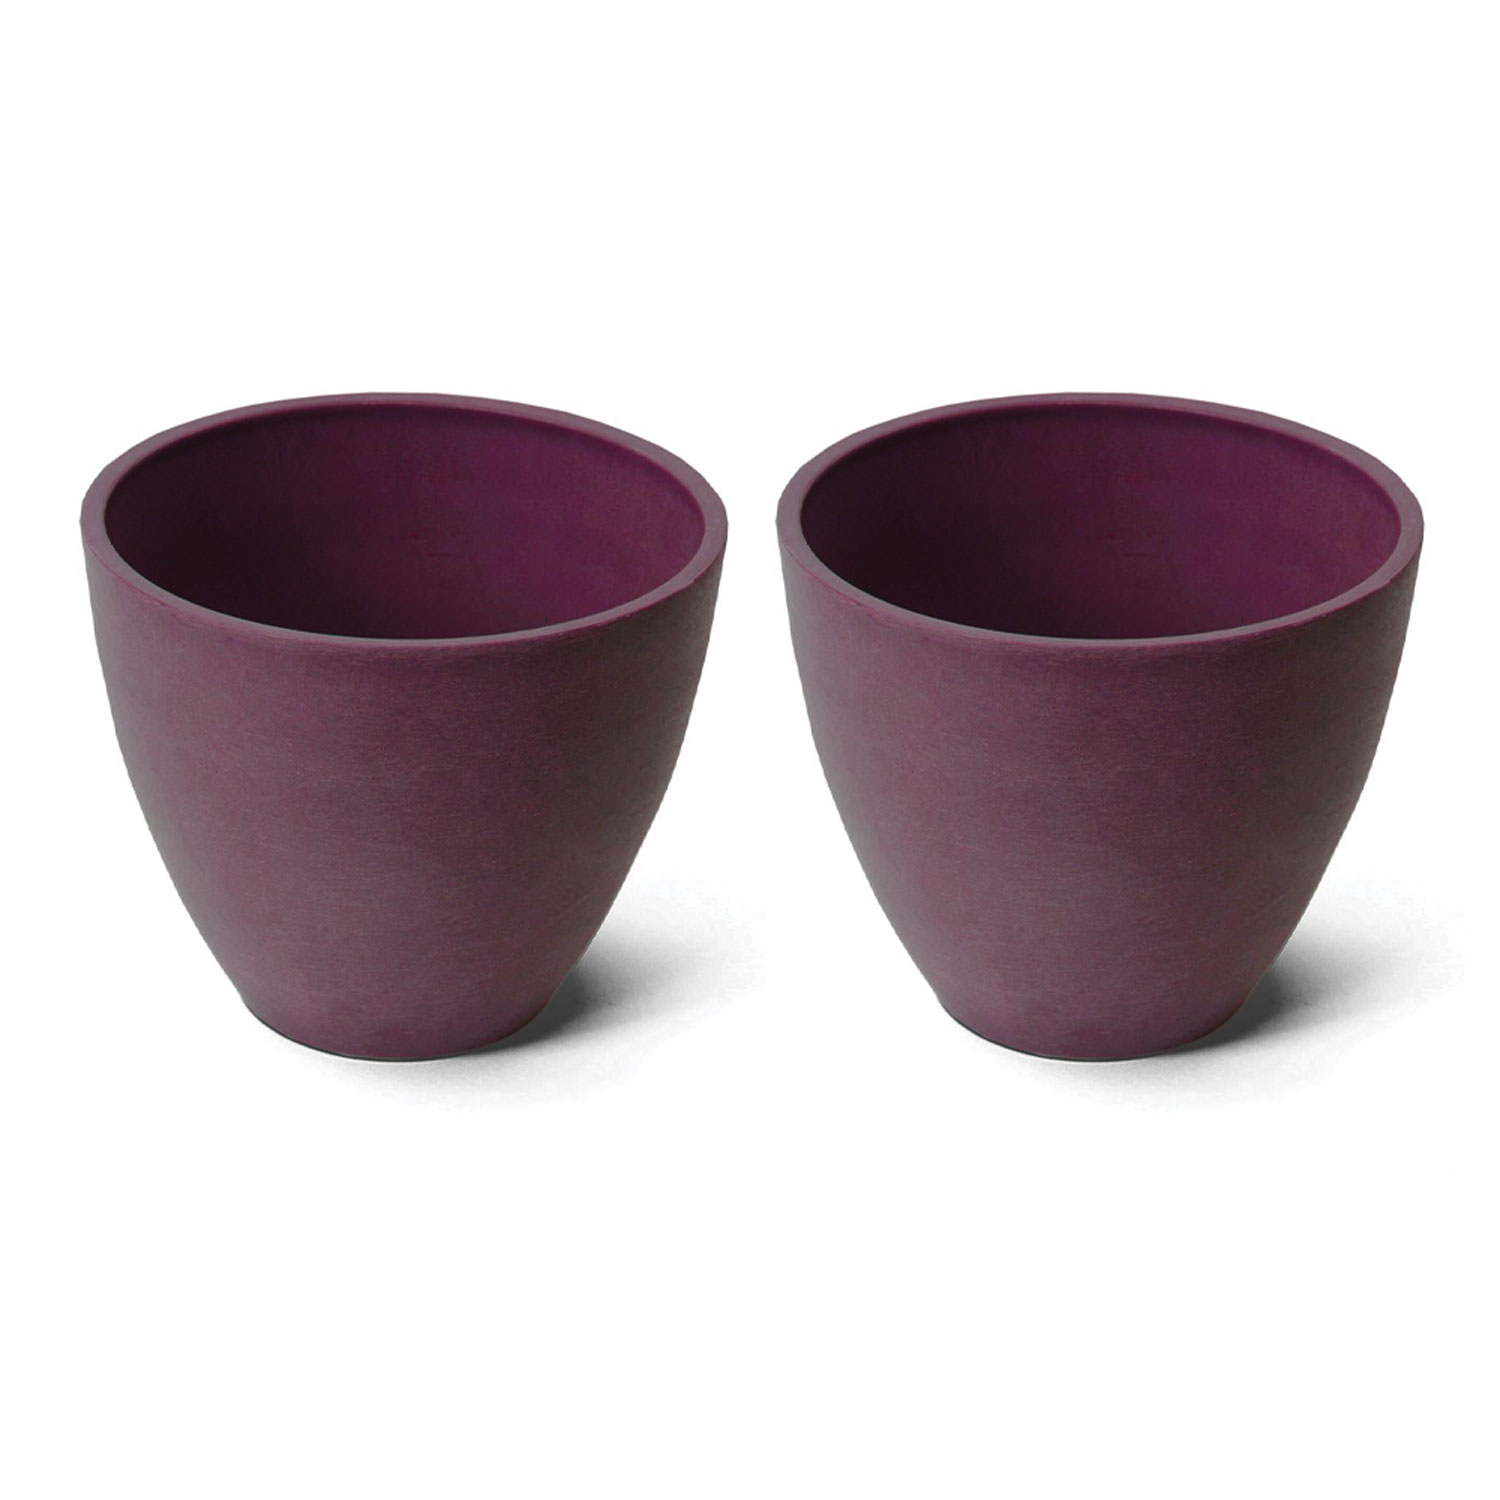 Algreen Valencia Indoor and Outdoor Planter and Flower Pot, Purple (2 Pack) - image 1 of 2